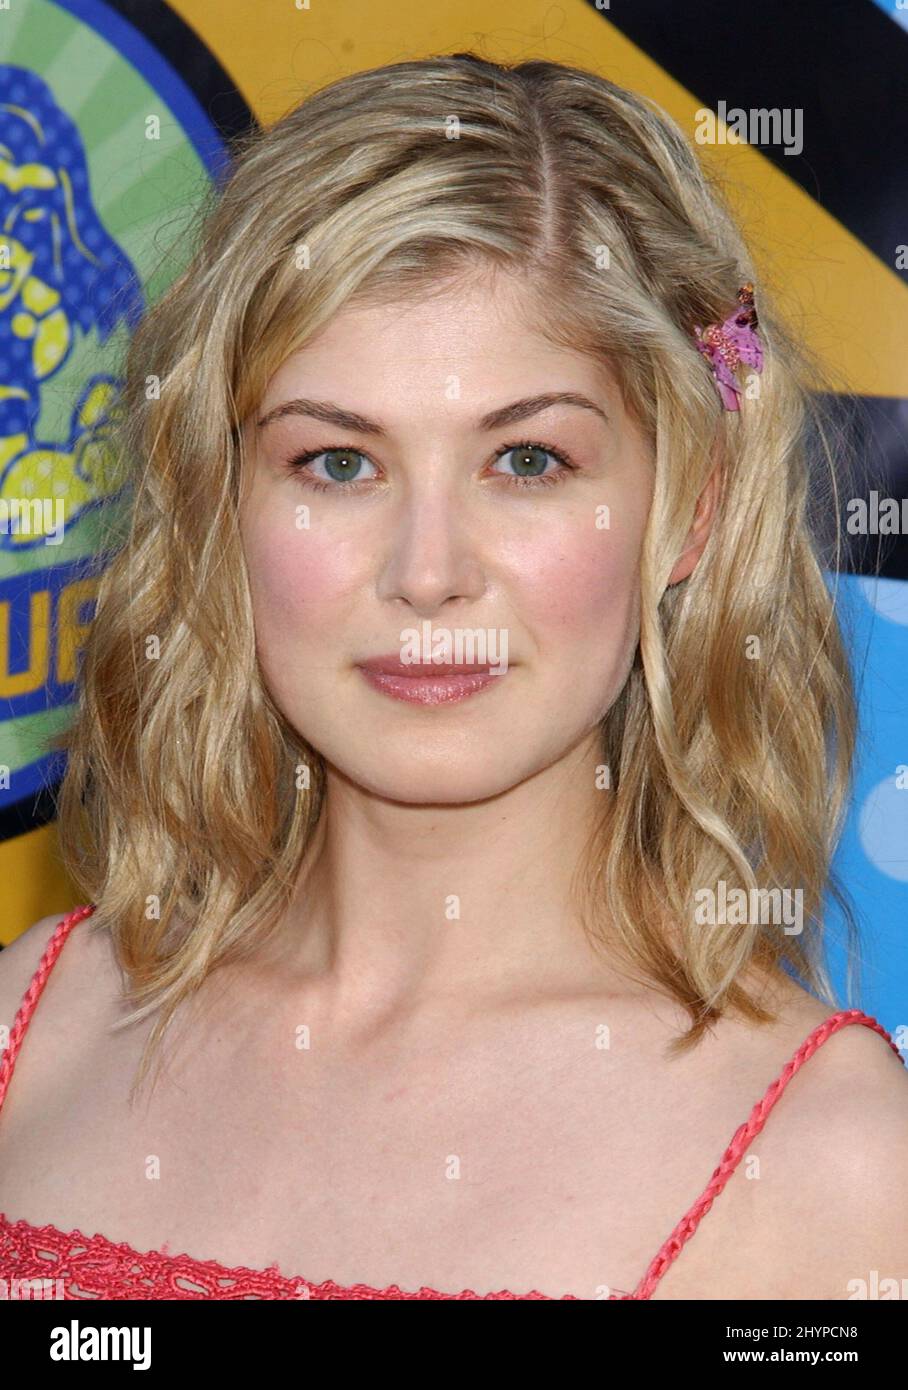 ROSAMUND PIKE ATTENDS THE 2003 MTV MOVIE AWARDS IN LOS ANGELES. PICTURE: UK PRESS Stock Photo